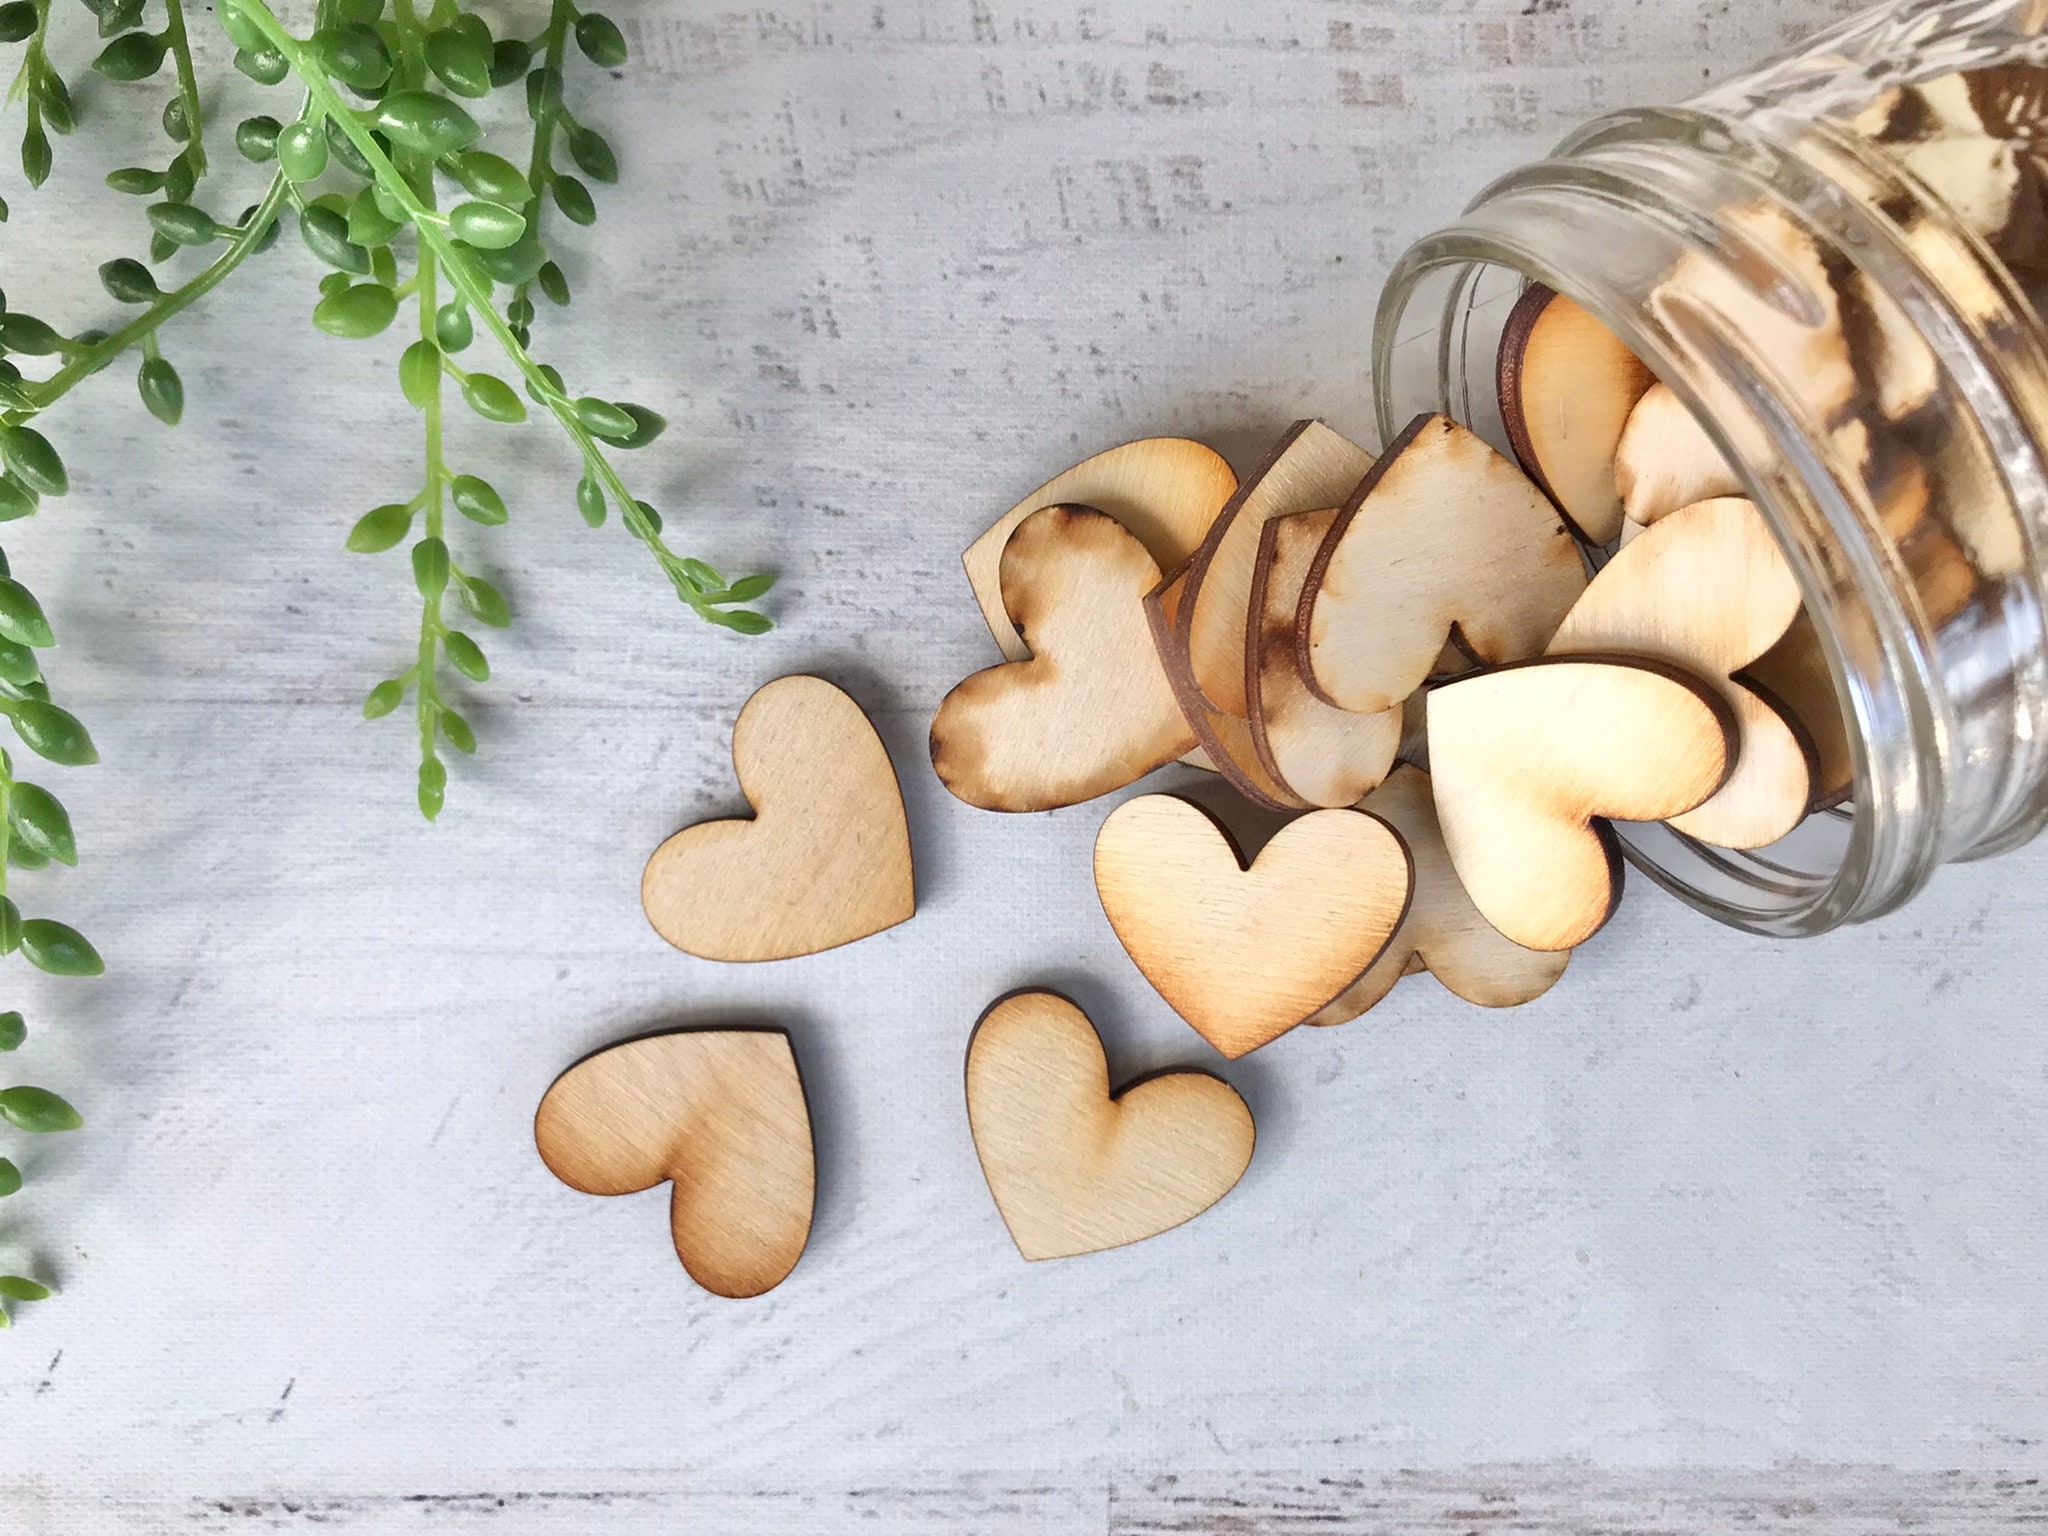 Blank 1 Wood Hearts - 100 ct - 1inch – Church House Woodworks